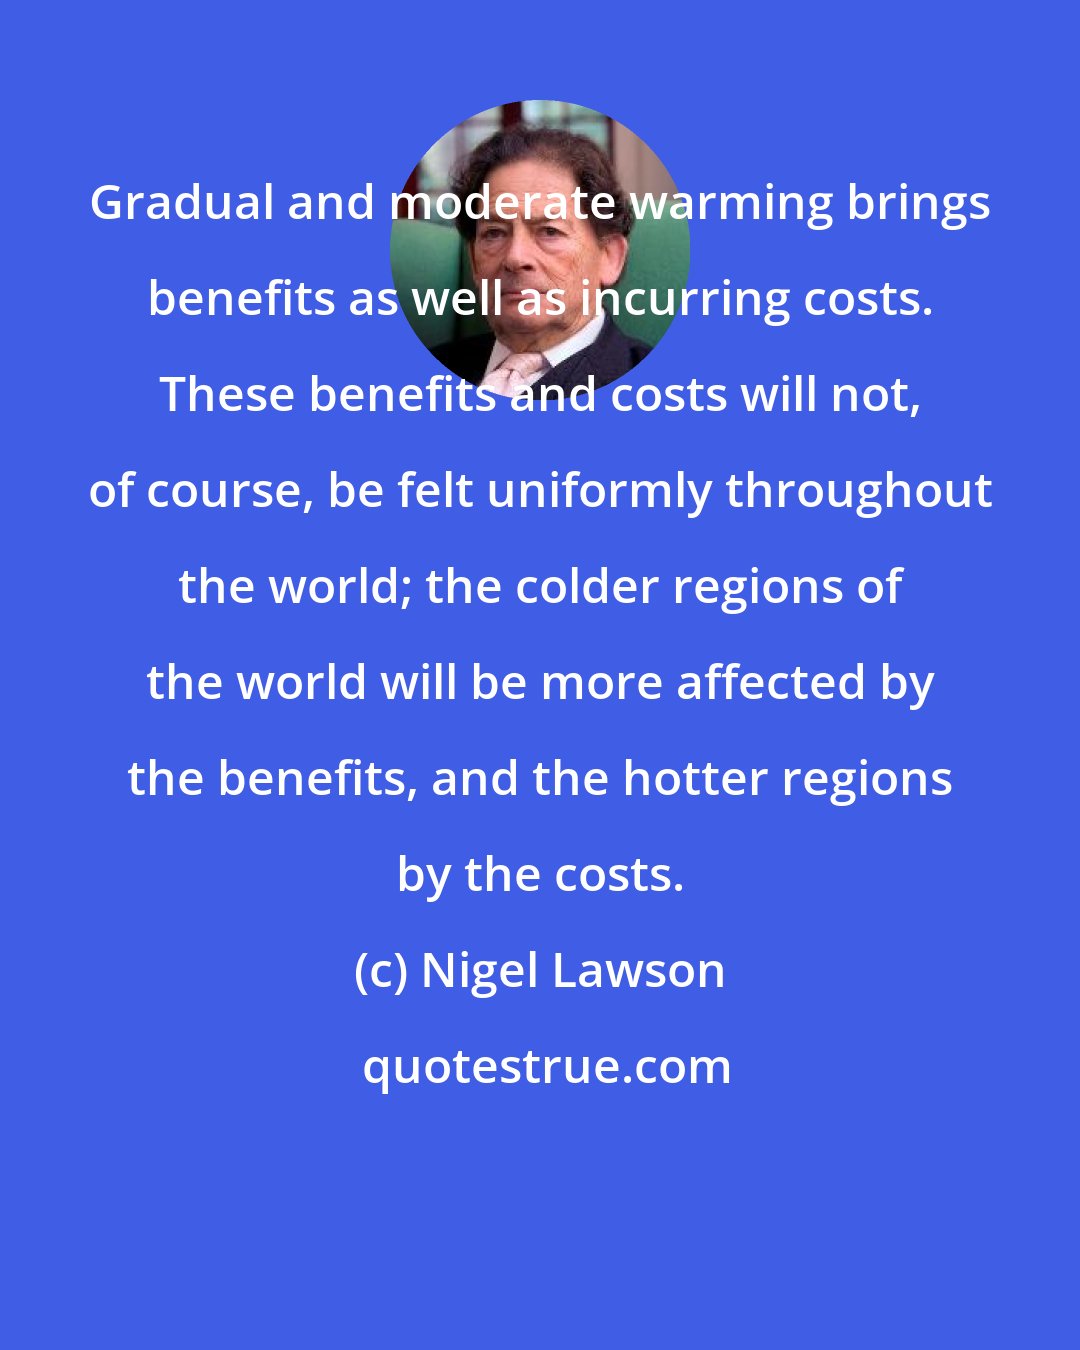 Nigel Lawson: Gradual and moderate warming brings benefits as well as incurring costs. These benefits and costs will not, of course, be felt uniformly throughout the world; the colder regions of the world will be more affected by the benefits, and the hotter regions by the costs.